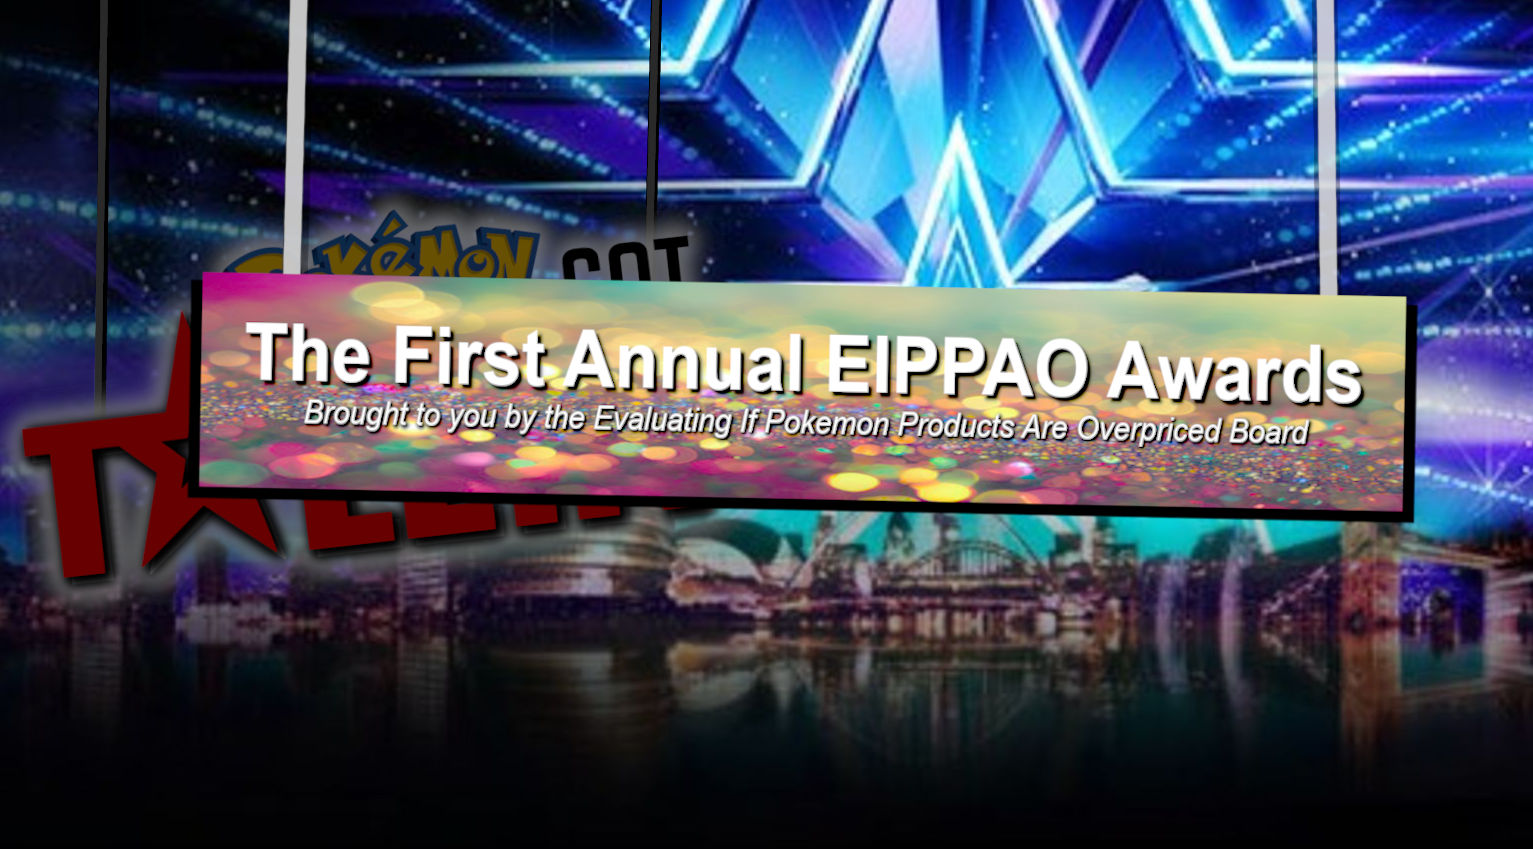 The First Annual EIPPAO Awards - Brought To You By The Evaluating If Pokemon Products Are Overpriced Board